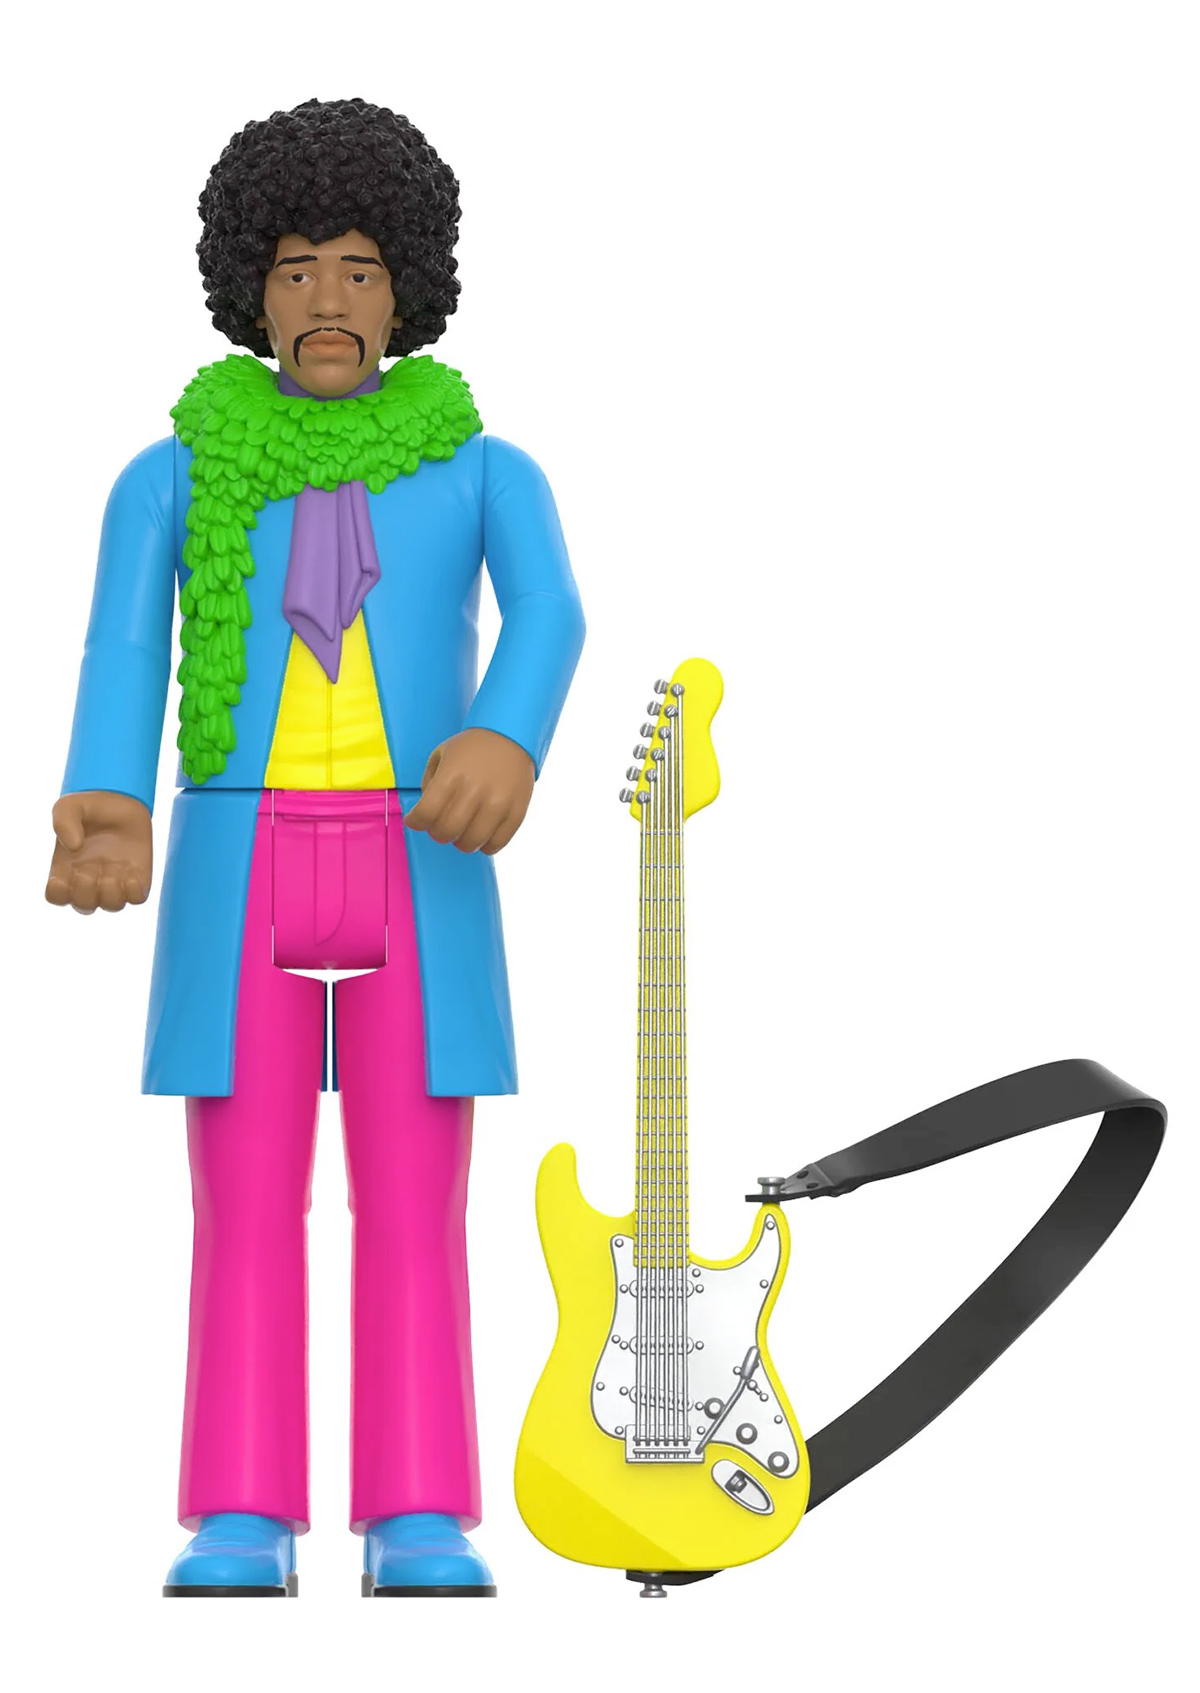 Action Figure ReAction Blacklight Jimi Hendrix Are You Experienced